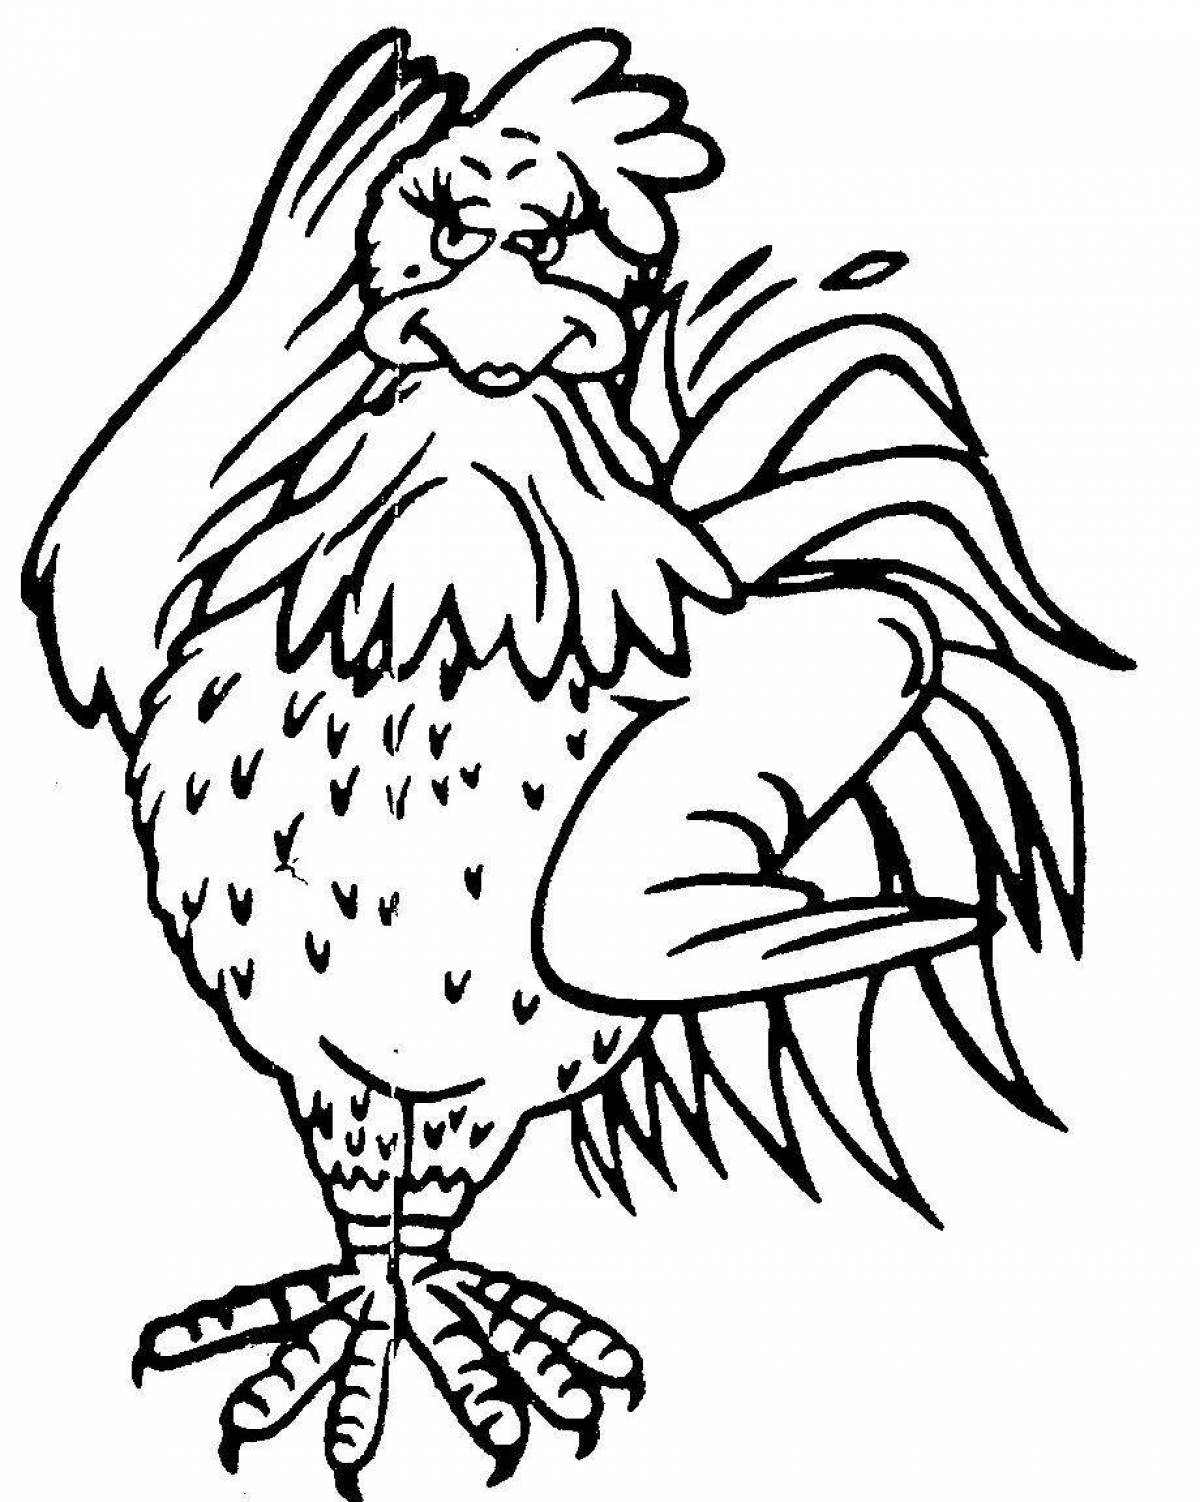 Awesome black chicken coloring page